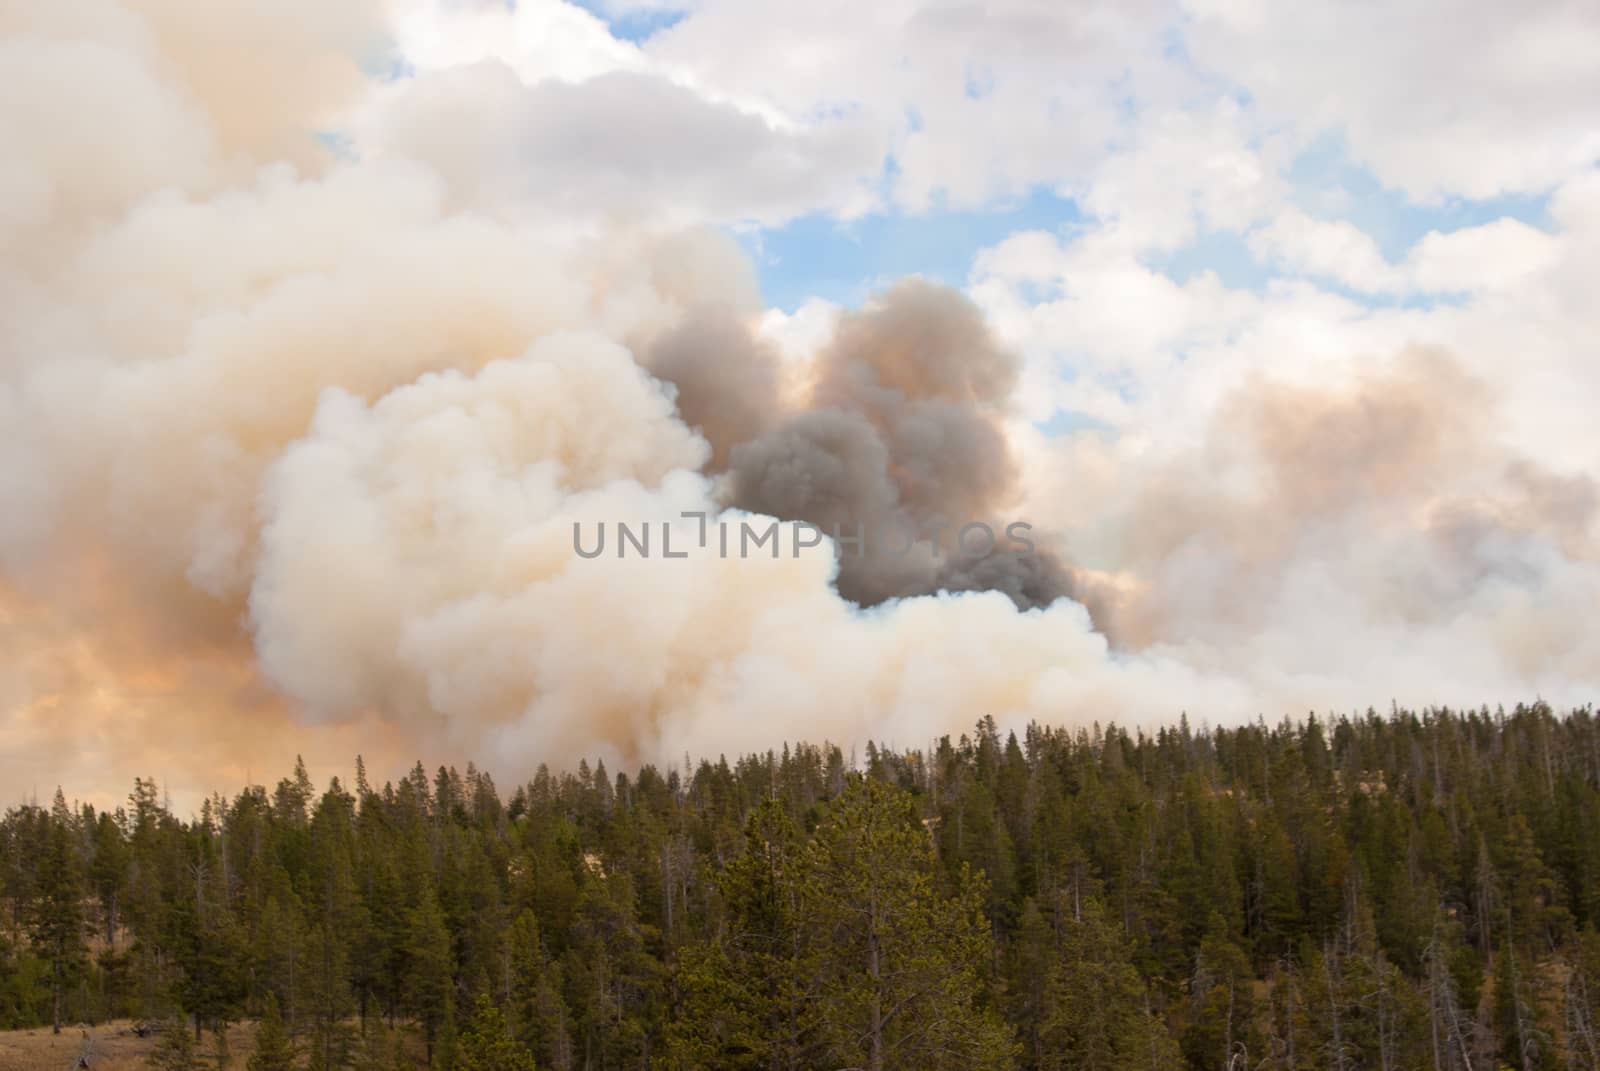 Flames dance in fire clouds over Yellowstone Park by emattil